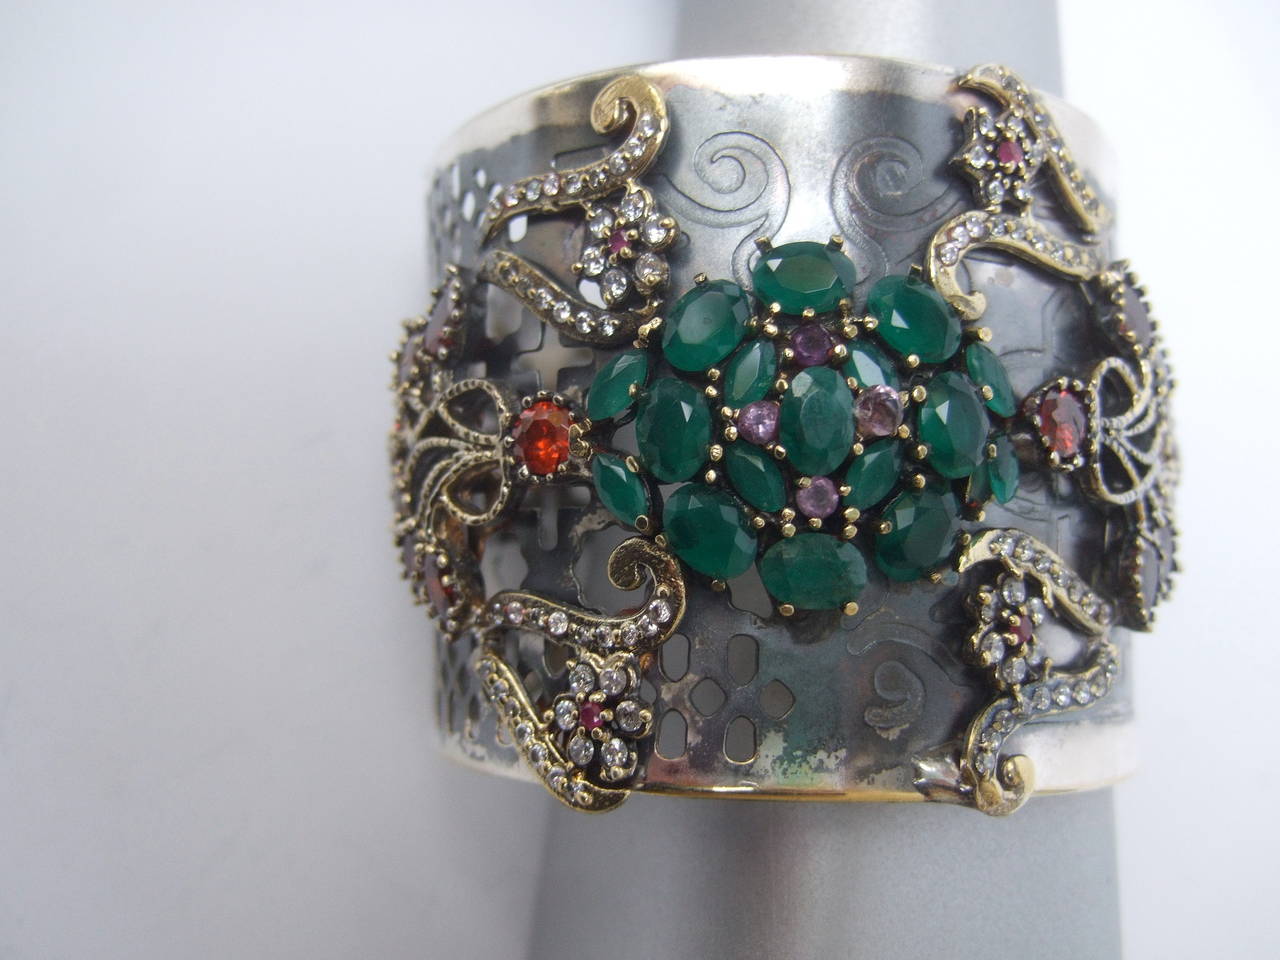 Crystal jewel encrusted wide silver metal cuff bracelet
The exotic cuff is embellished with a cluster of emerald green
glittering crystals in the center accented with four tiny amethyst  
crystals. The sides are enhanced with sinuous rows of